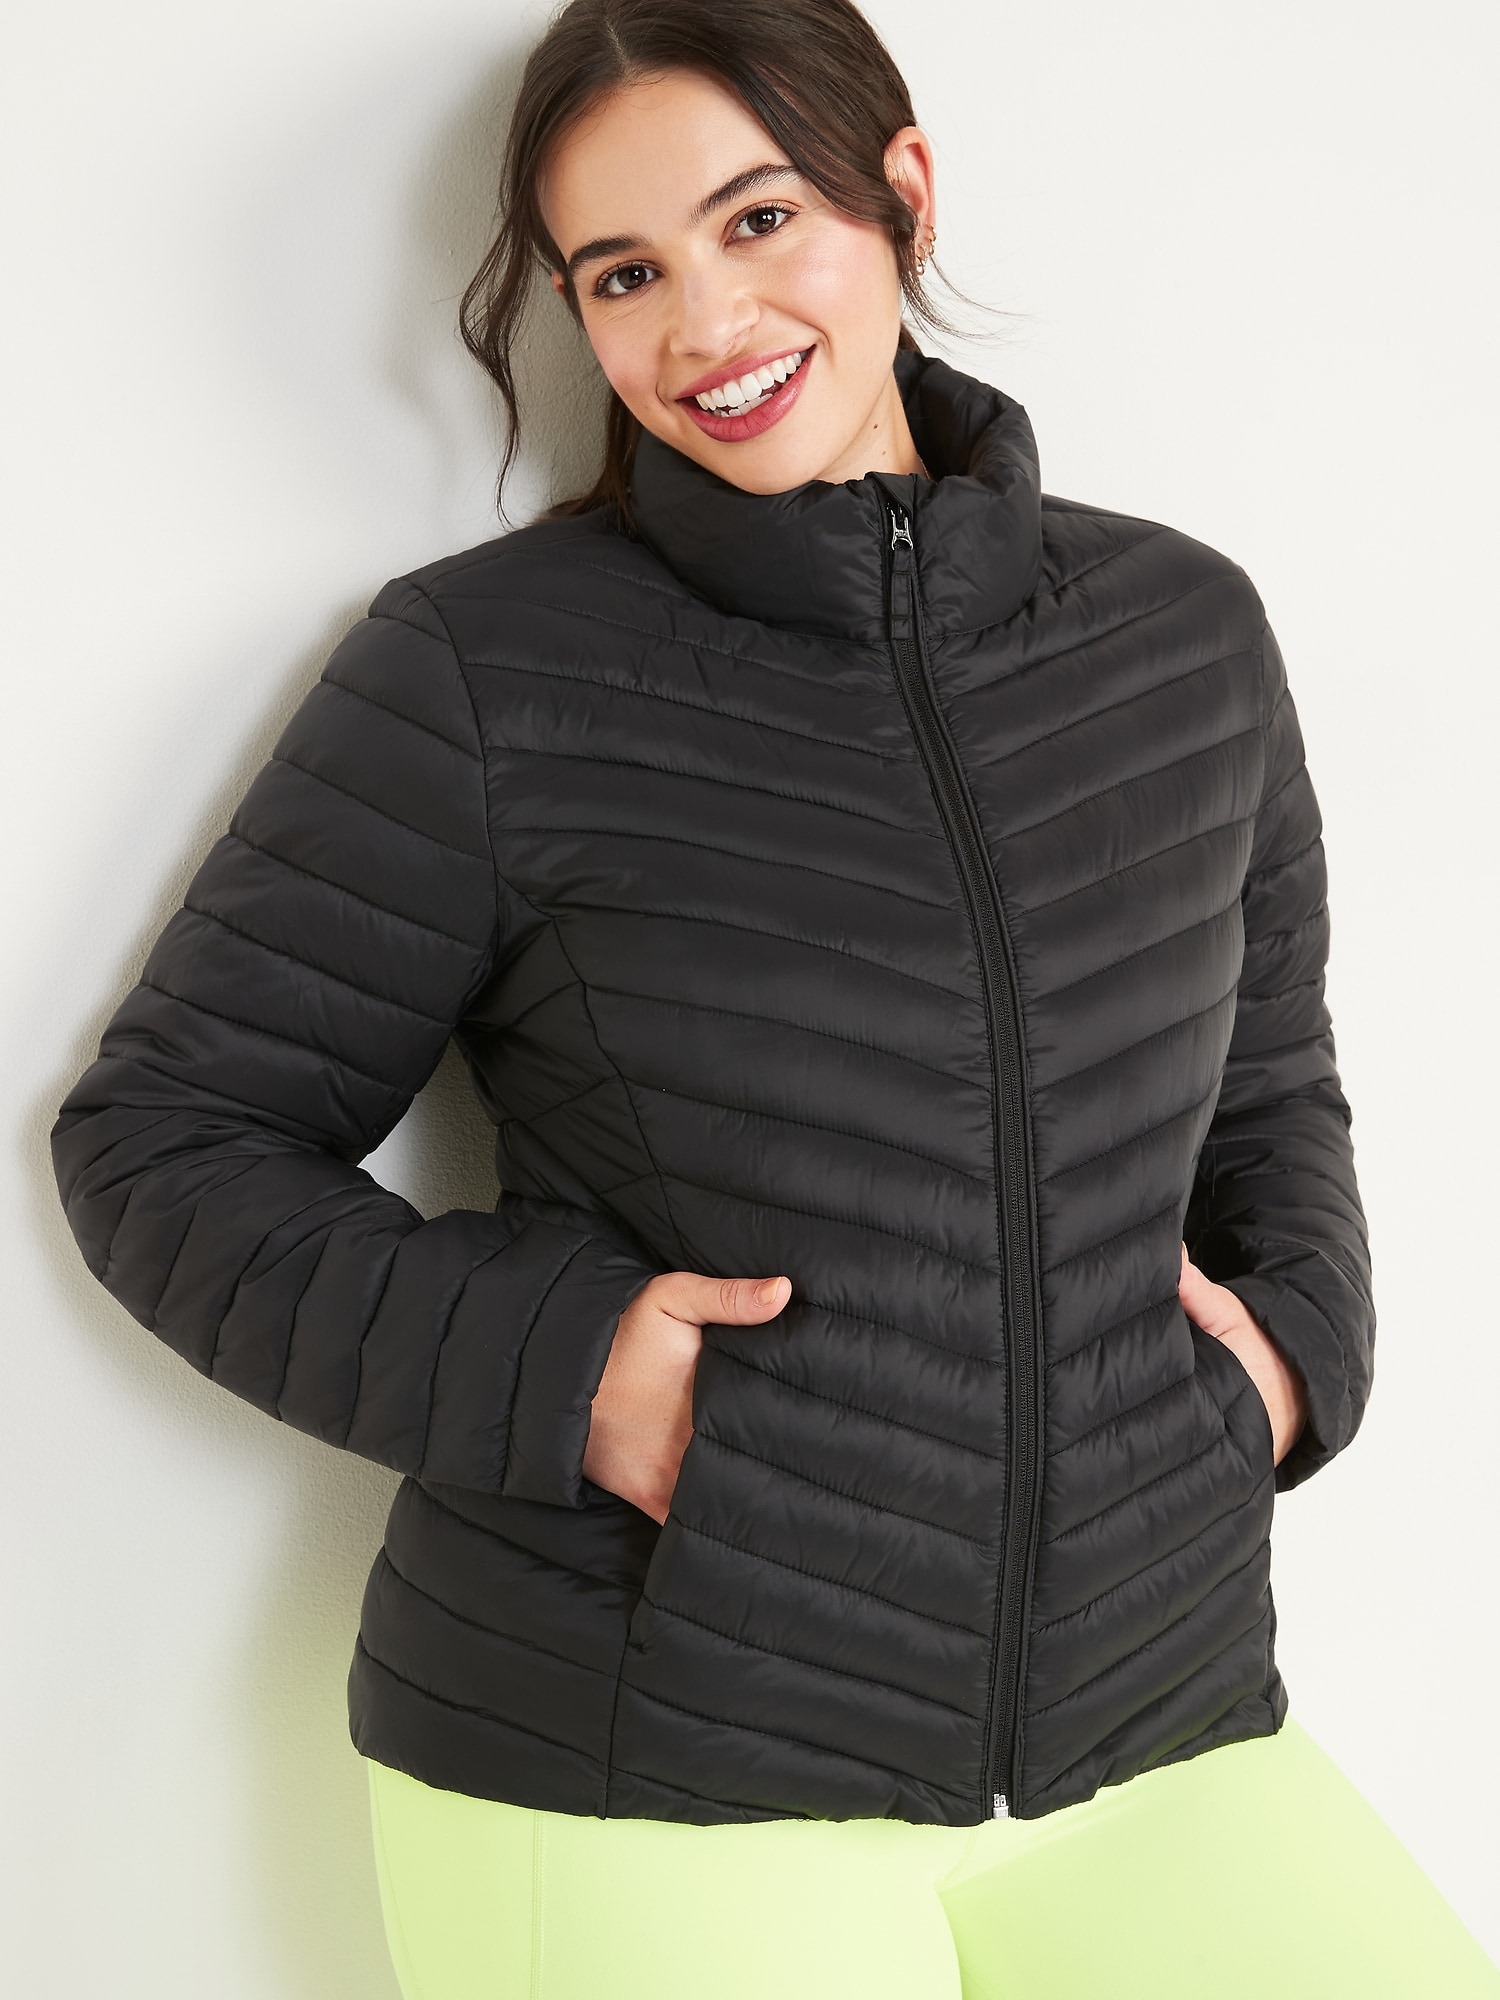 Jacket Water-Resistant Navy | Old Puffer Narrow-Channel for Women Packable